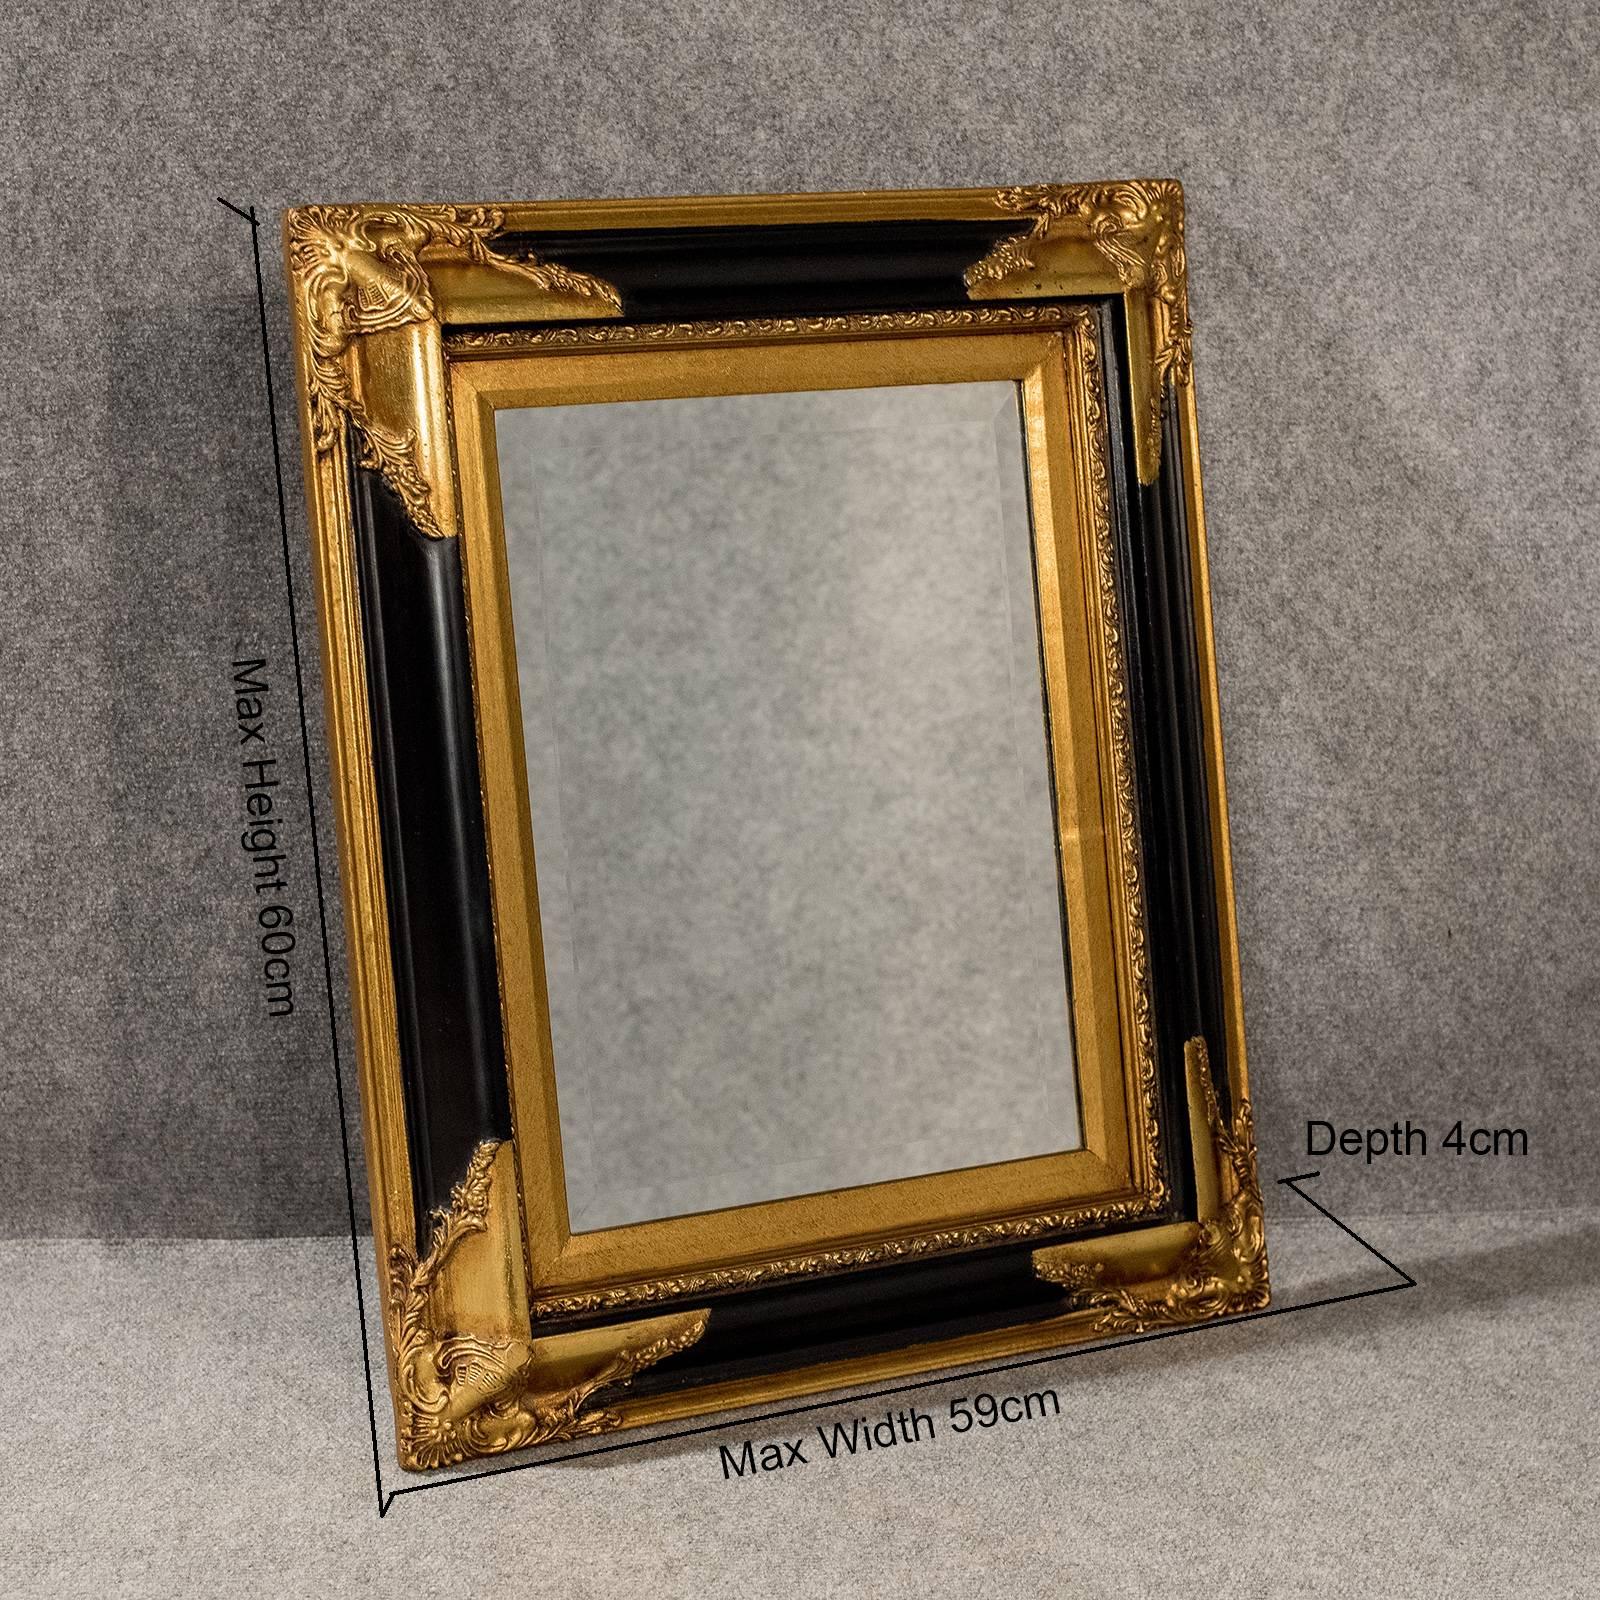 A pleasing English Regency style wall mirror presented in very good antique condition
Displaying quality ornate gilt dressed ebonized frame
With desirable bevel edge mirror plate
Can be hung in either portrait or landscape orientation
Complete